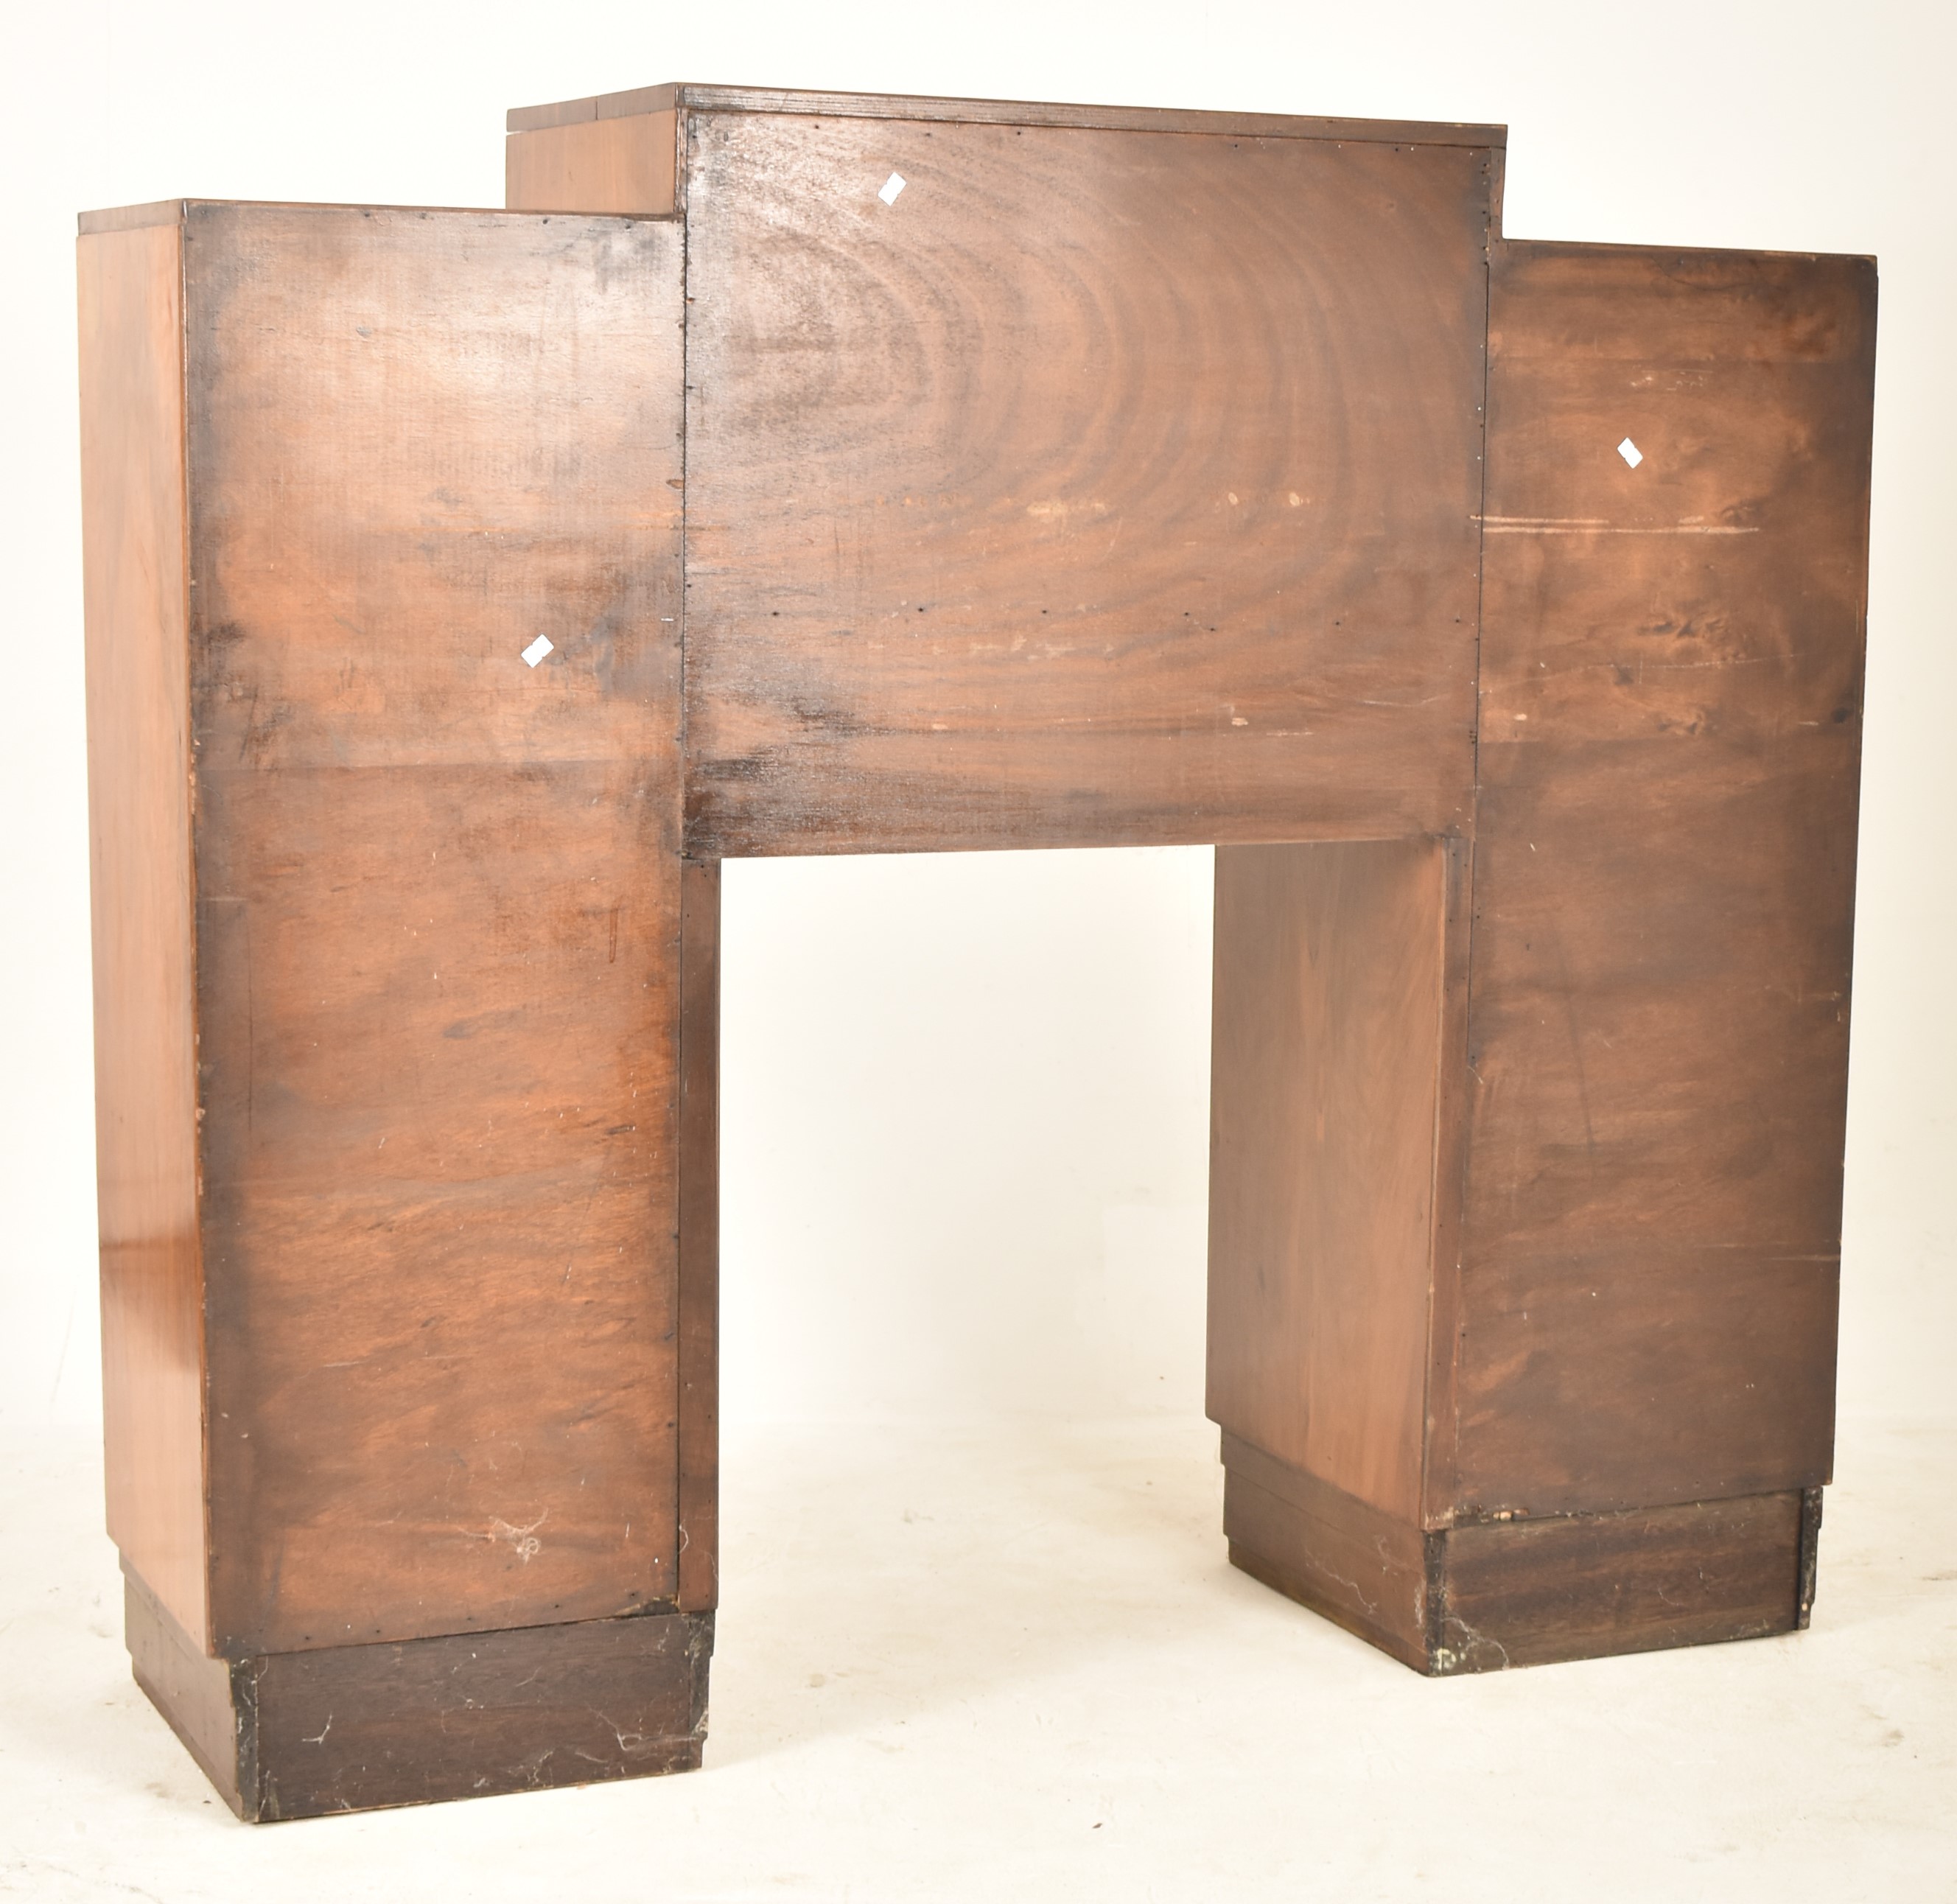 ART DECO 1930S BURR WALNUT FALL FRONT COCKTAIL CABINET - Image 7 of 7